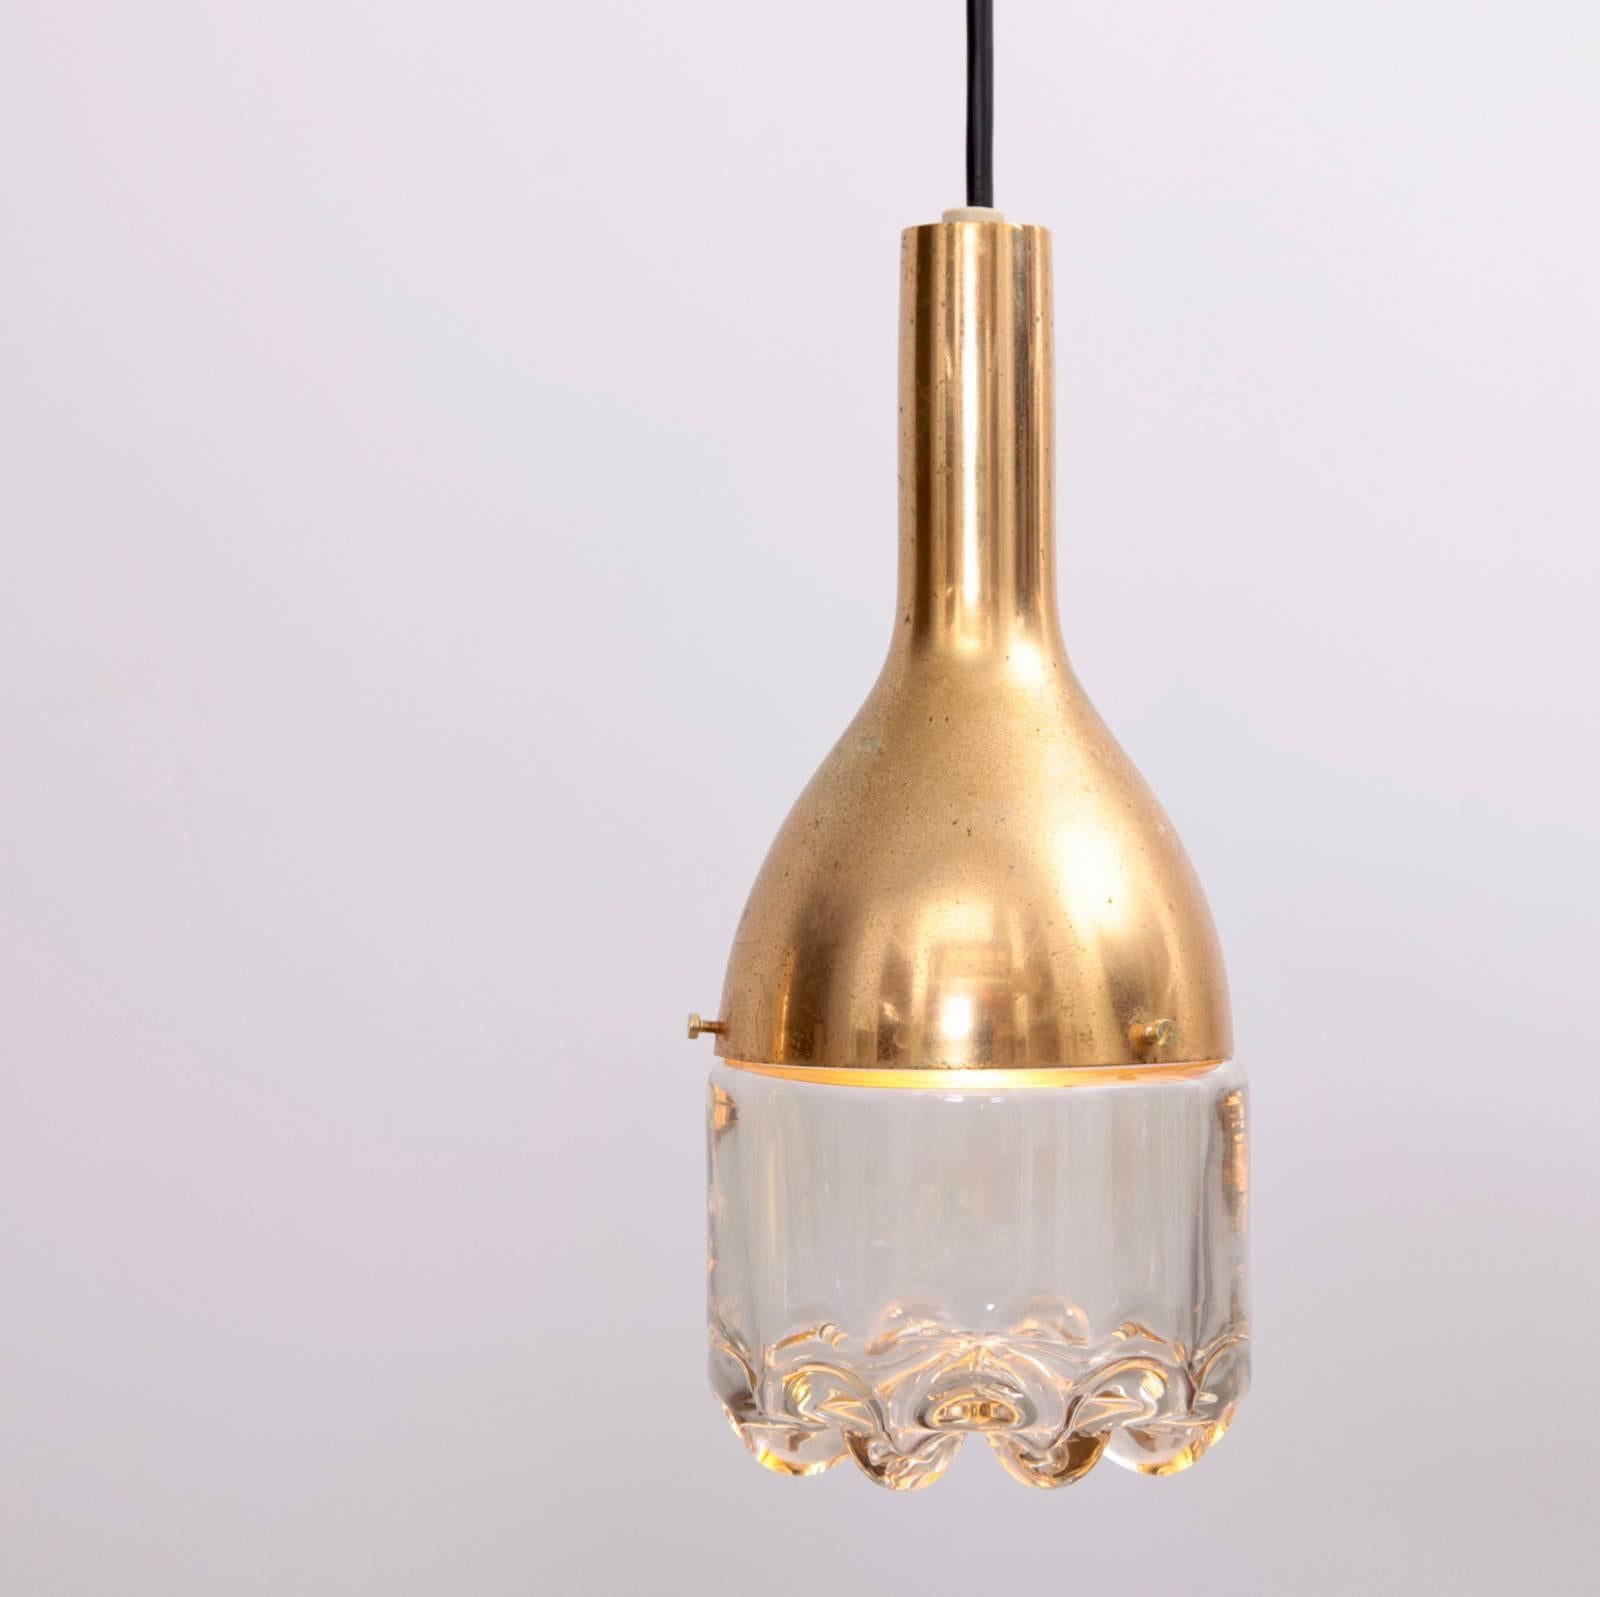 Very decorative pendant lamp with a glass part that looks a heavy tumber whiskey glass. The brass shows patina that can be polished if the customer prefers that. Nice quality. One x E14 bulb / 60 watts max.
To be on the safe side, the lamp should be